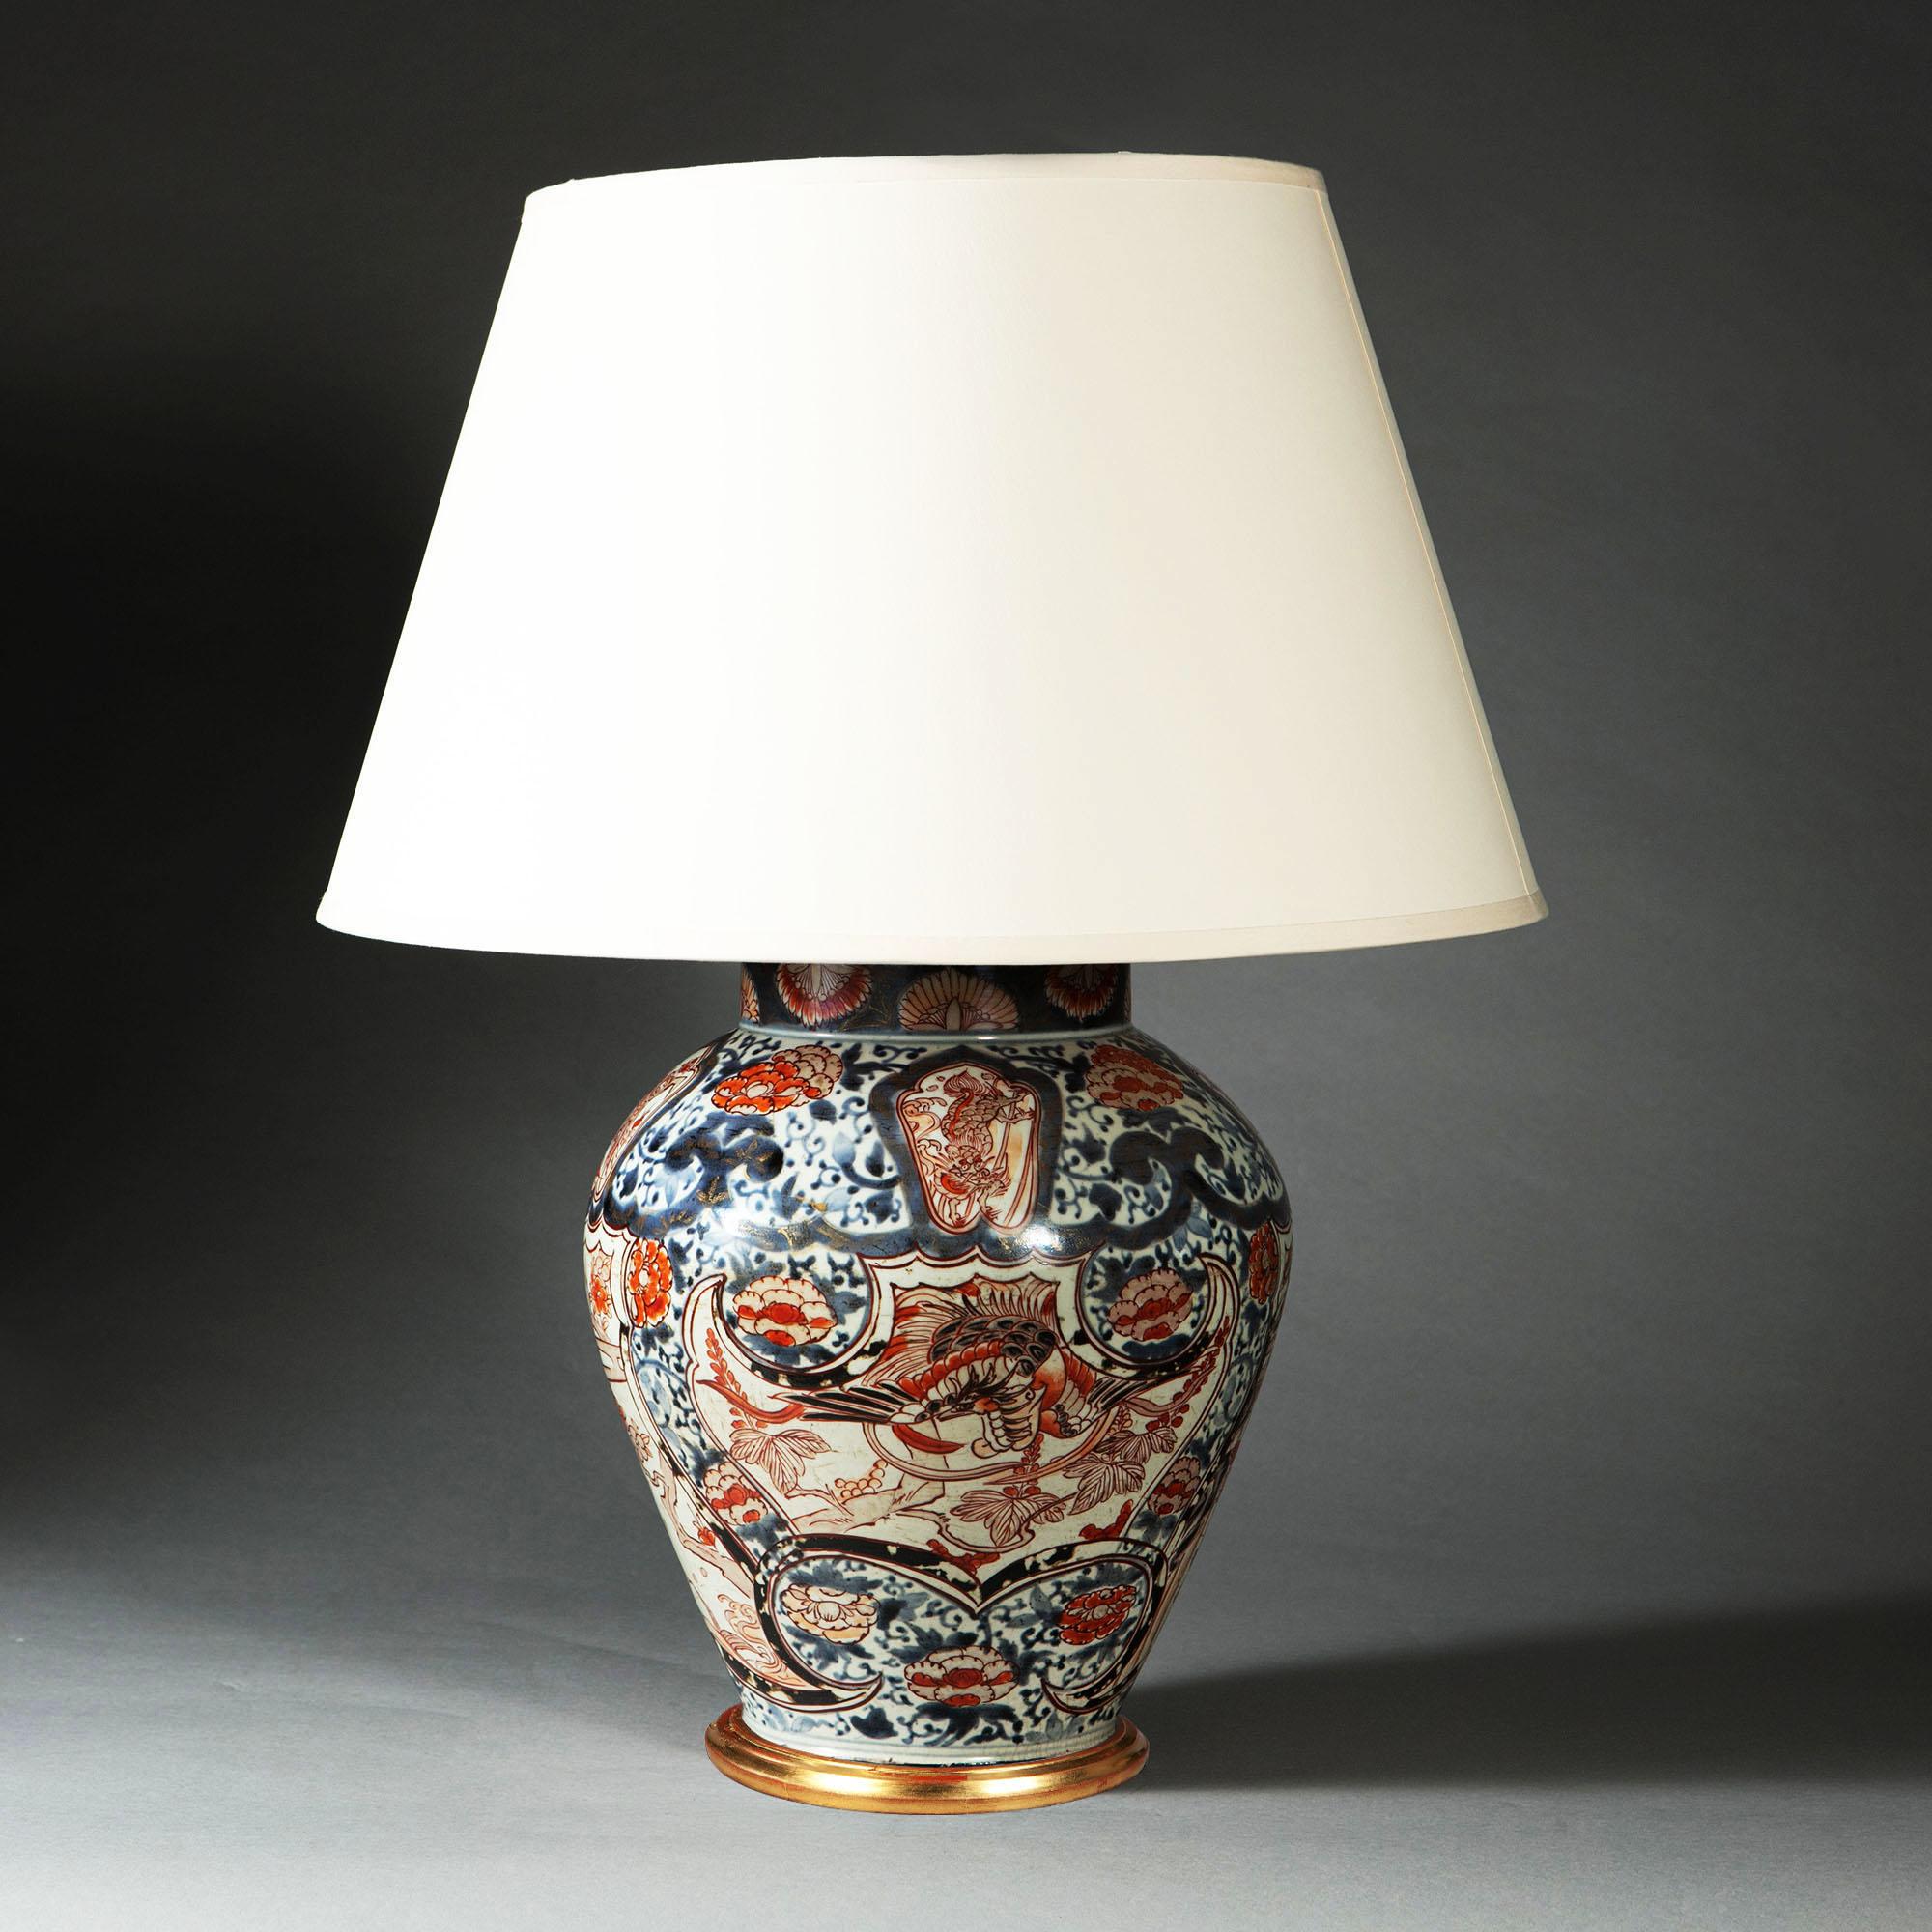 Ceramic Mid-19th Century Imari Vase as a Table Lamp, Mounted with Giltwood Base